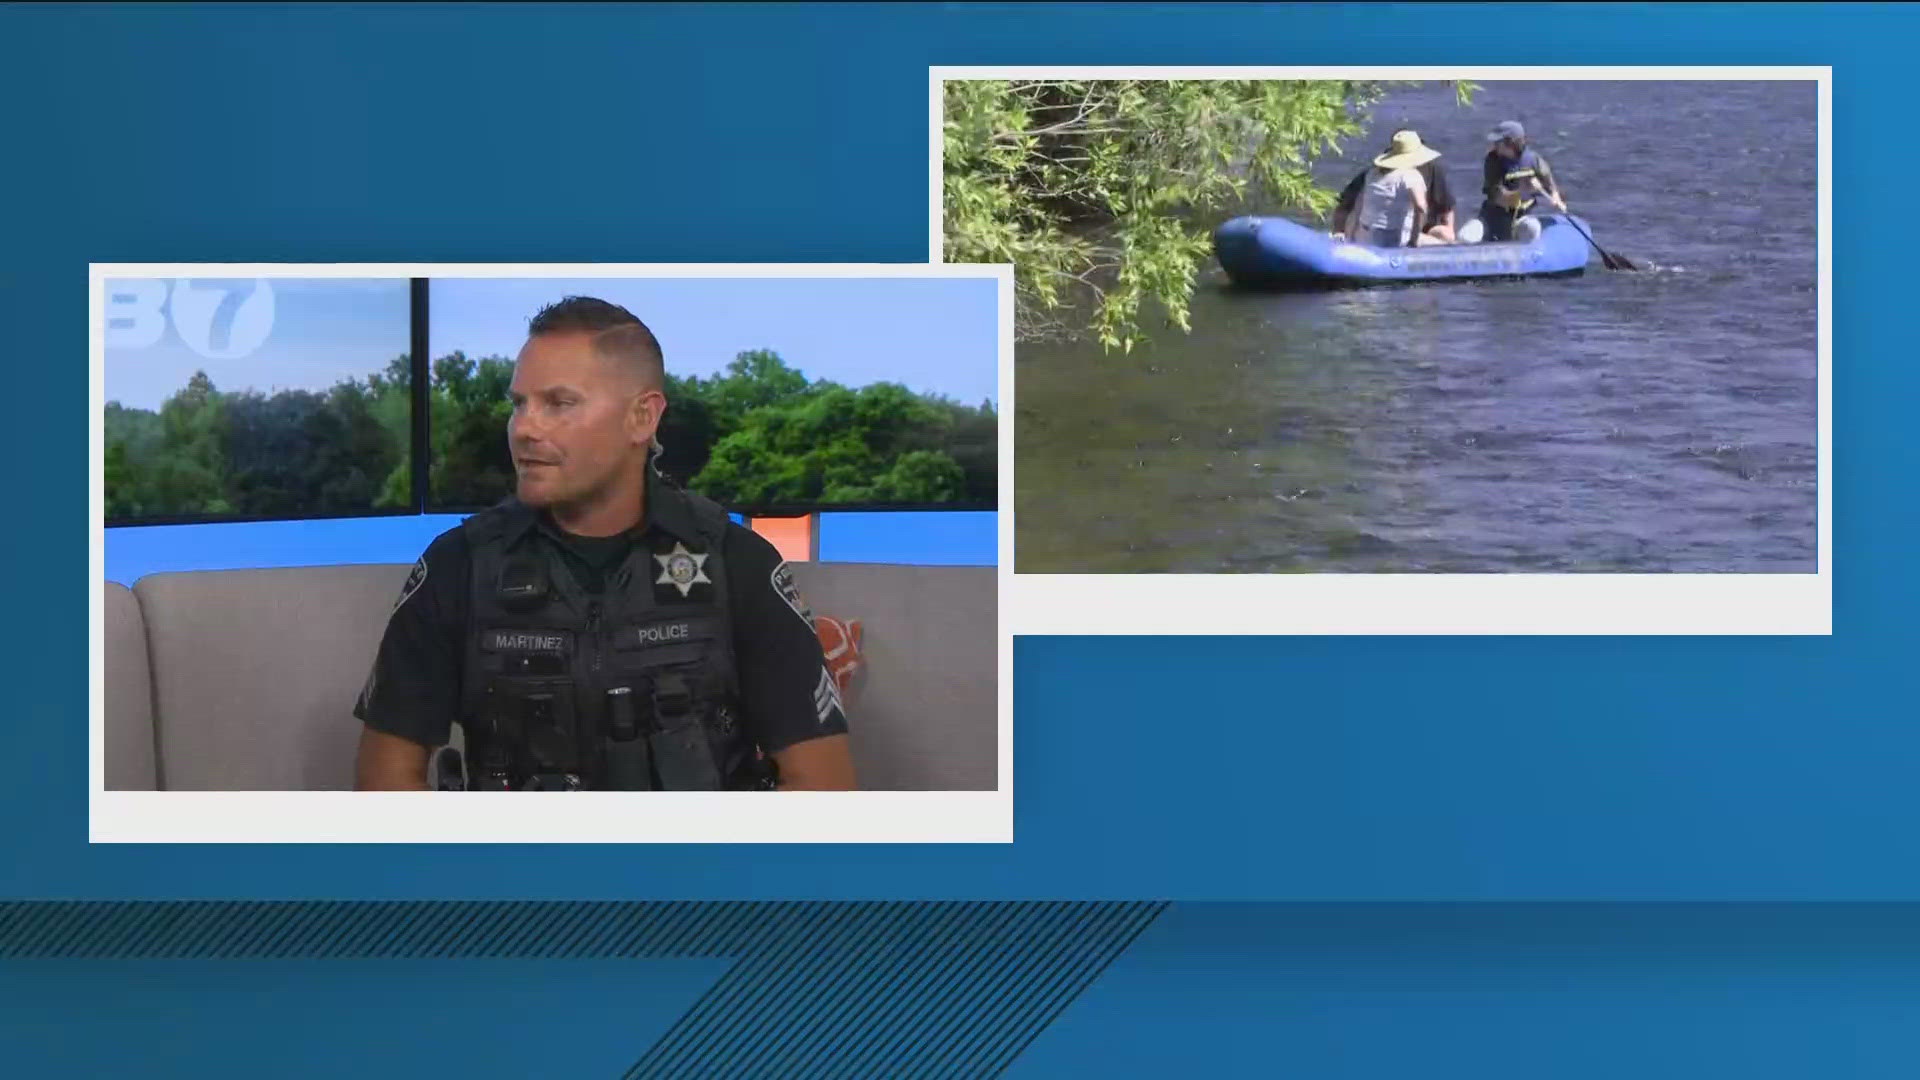 Sgt. Joe Martinez with the Boise Police Department joins KTVB on opening day of river float season to provide some important reminders for a successful summer.